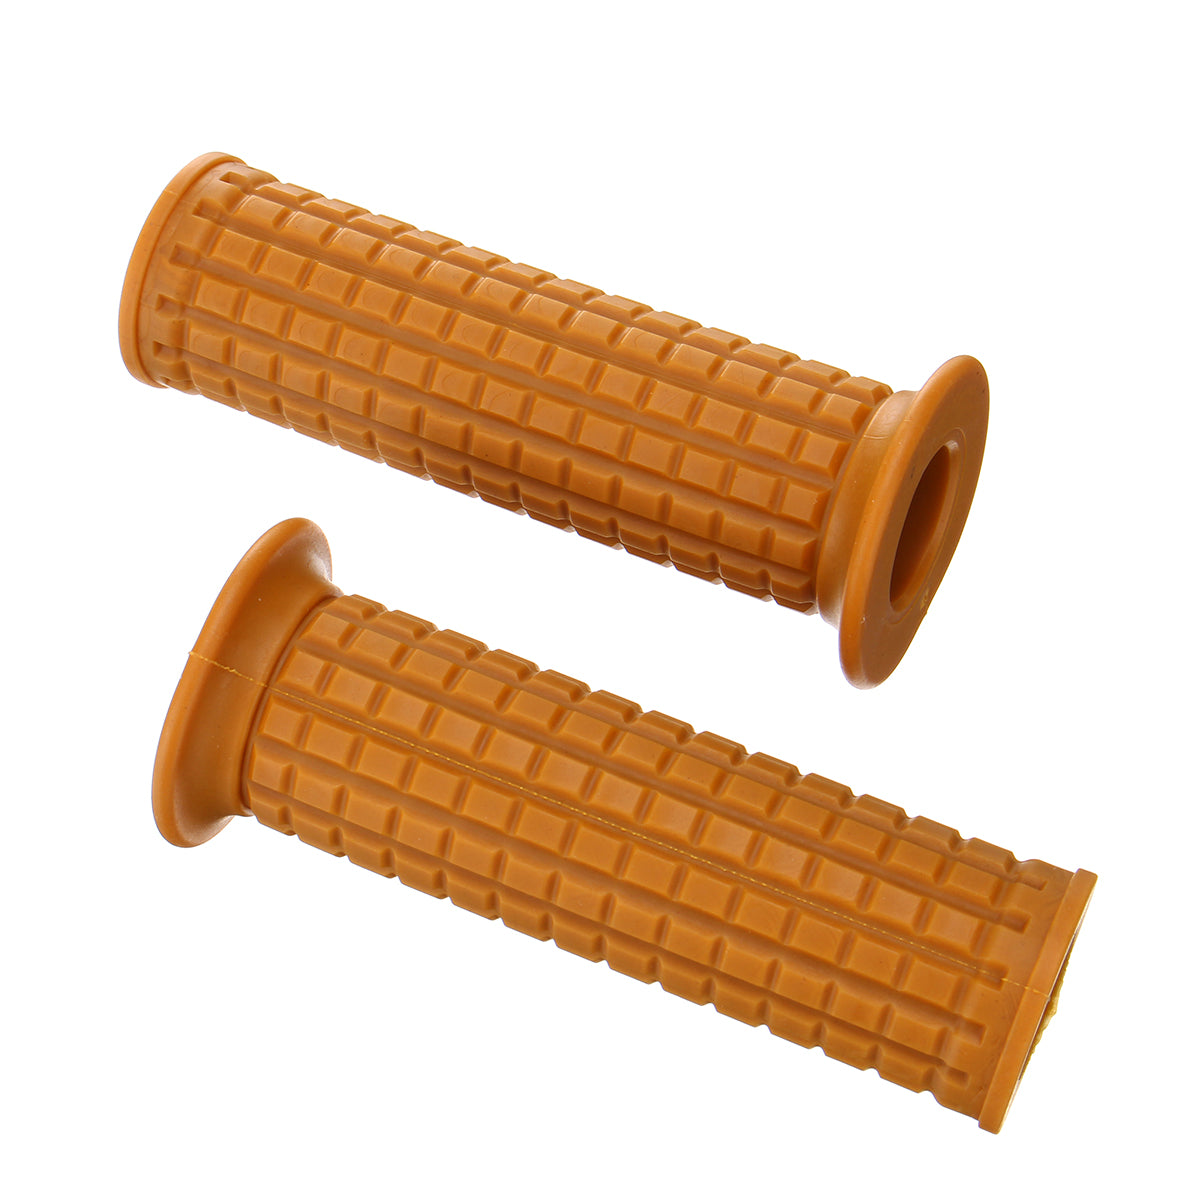 Chocolate 7/8 inch 22mm Rubber Handlebar End Grip For Motorcycle ATV Dirt Bike Cafe Racer